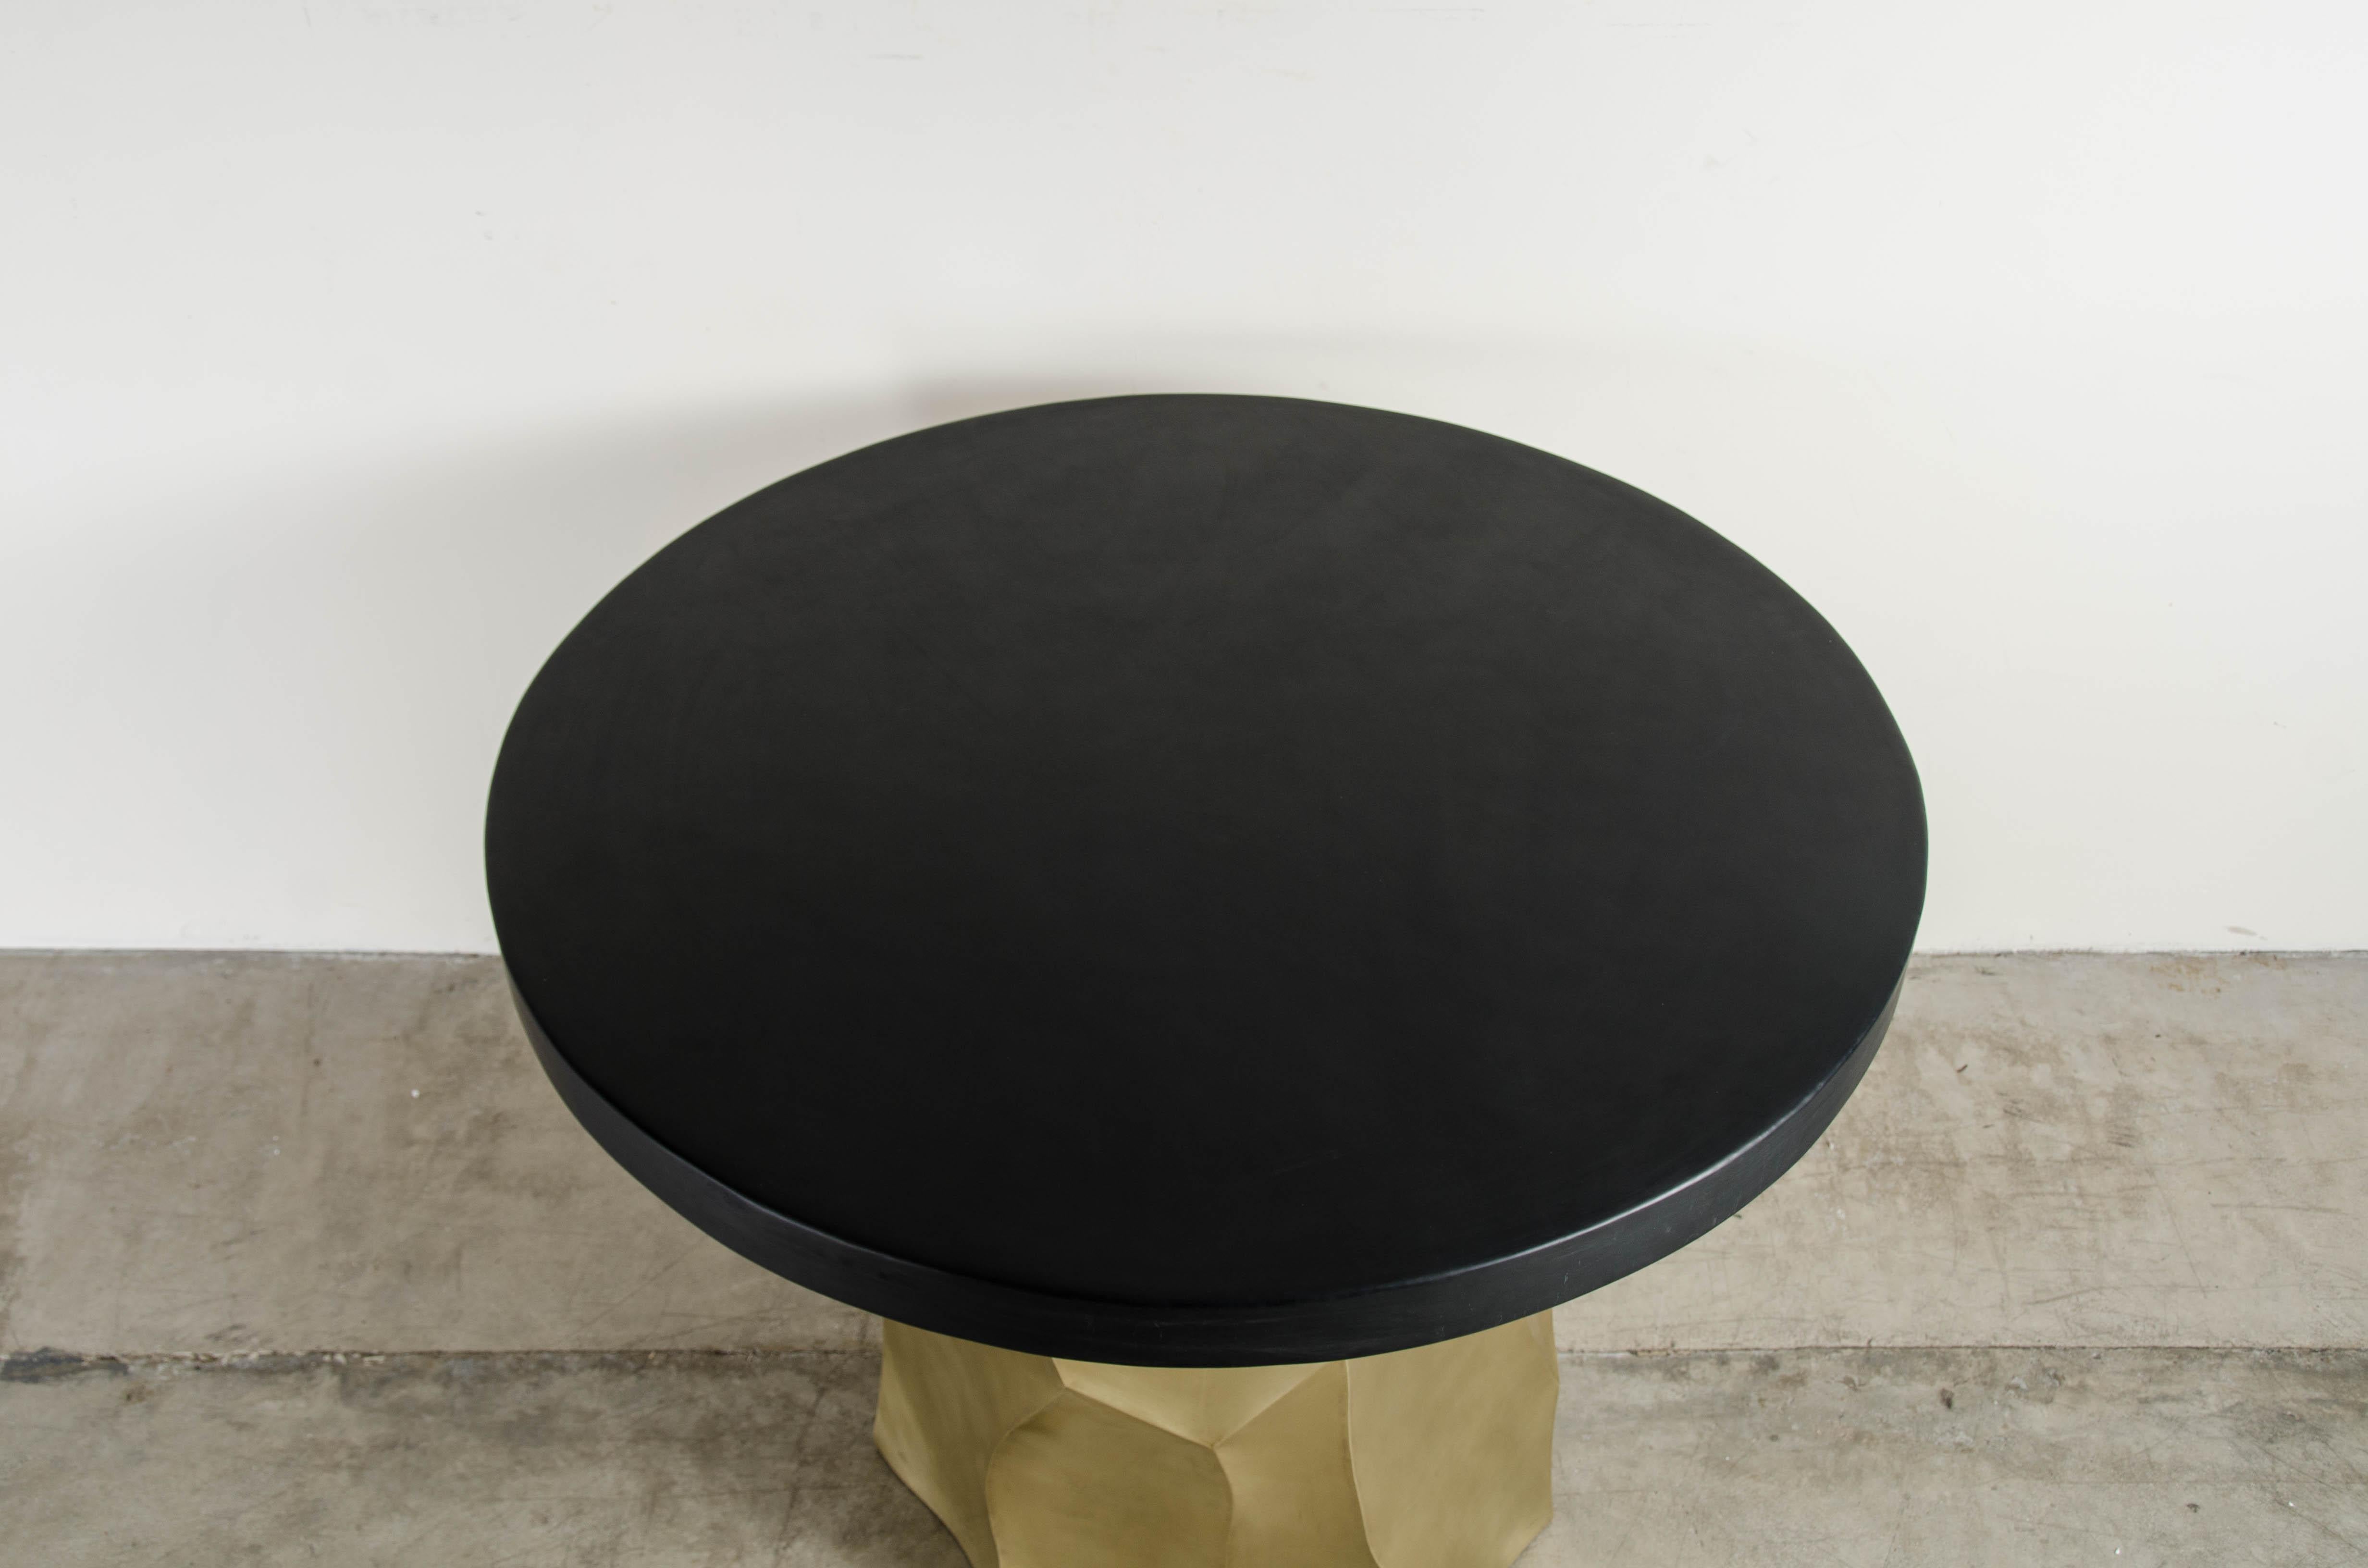 Metal Black Lacquer Entry Table Top by Robert Kuo, Limited Edition For Sale